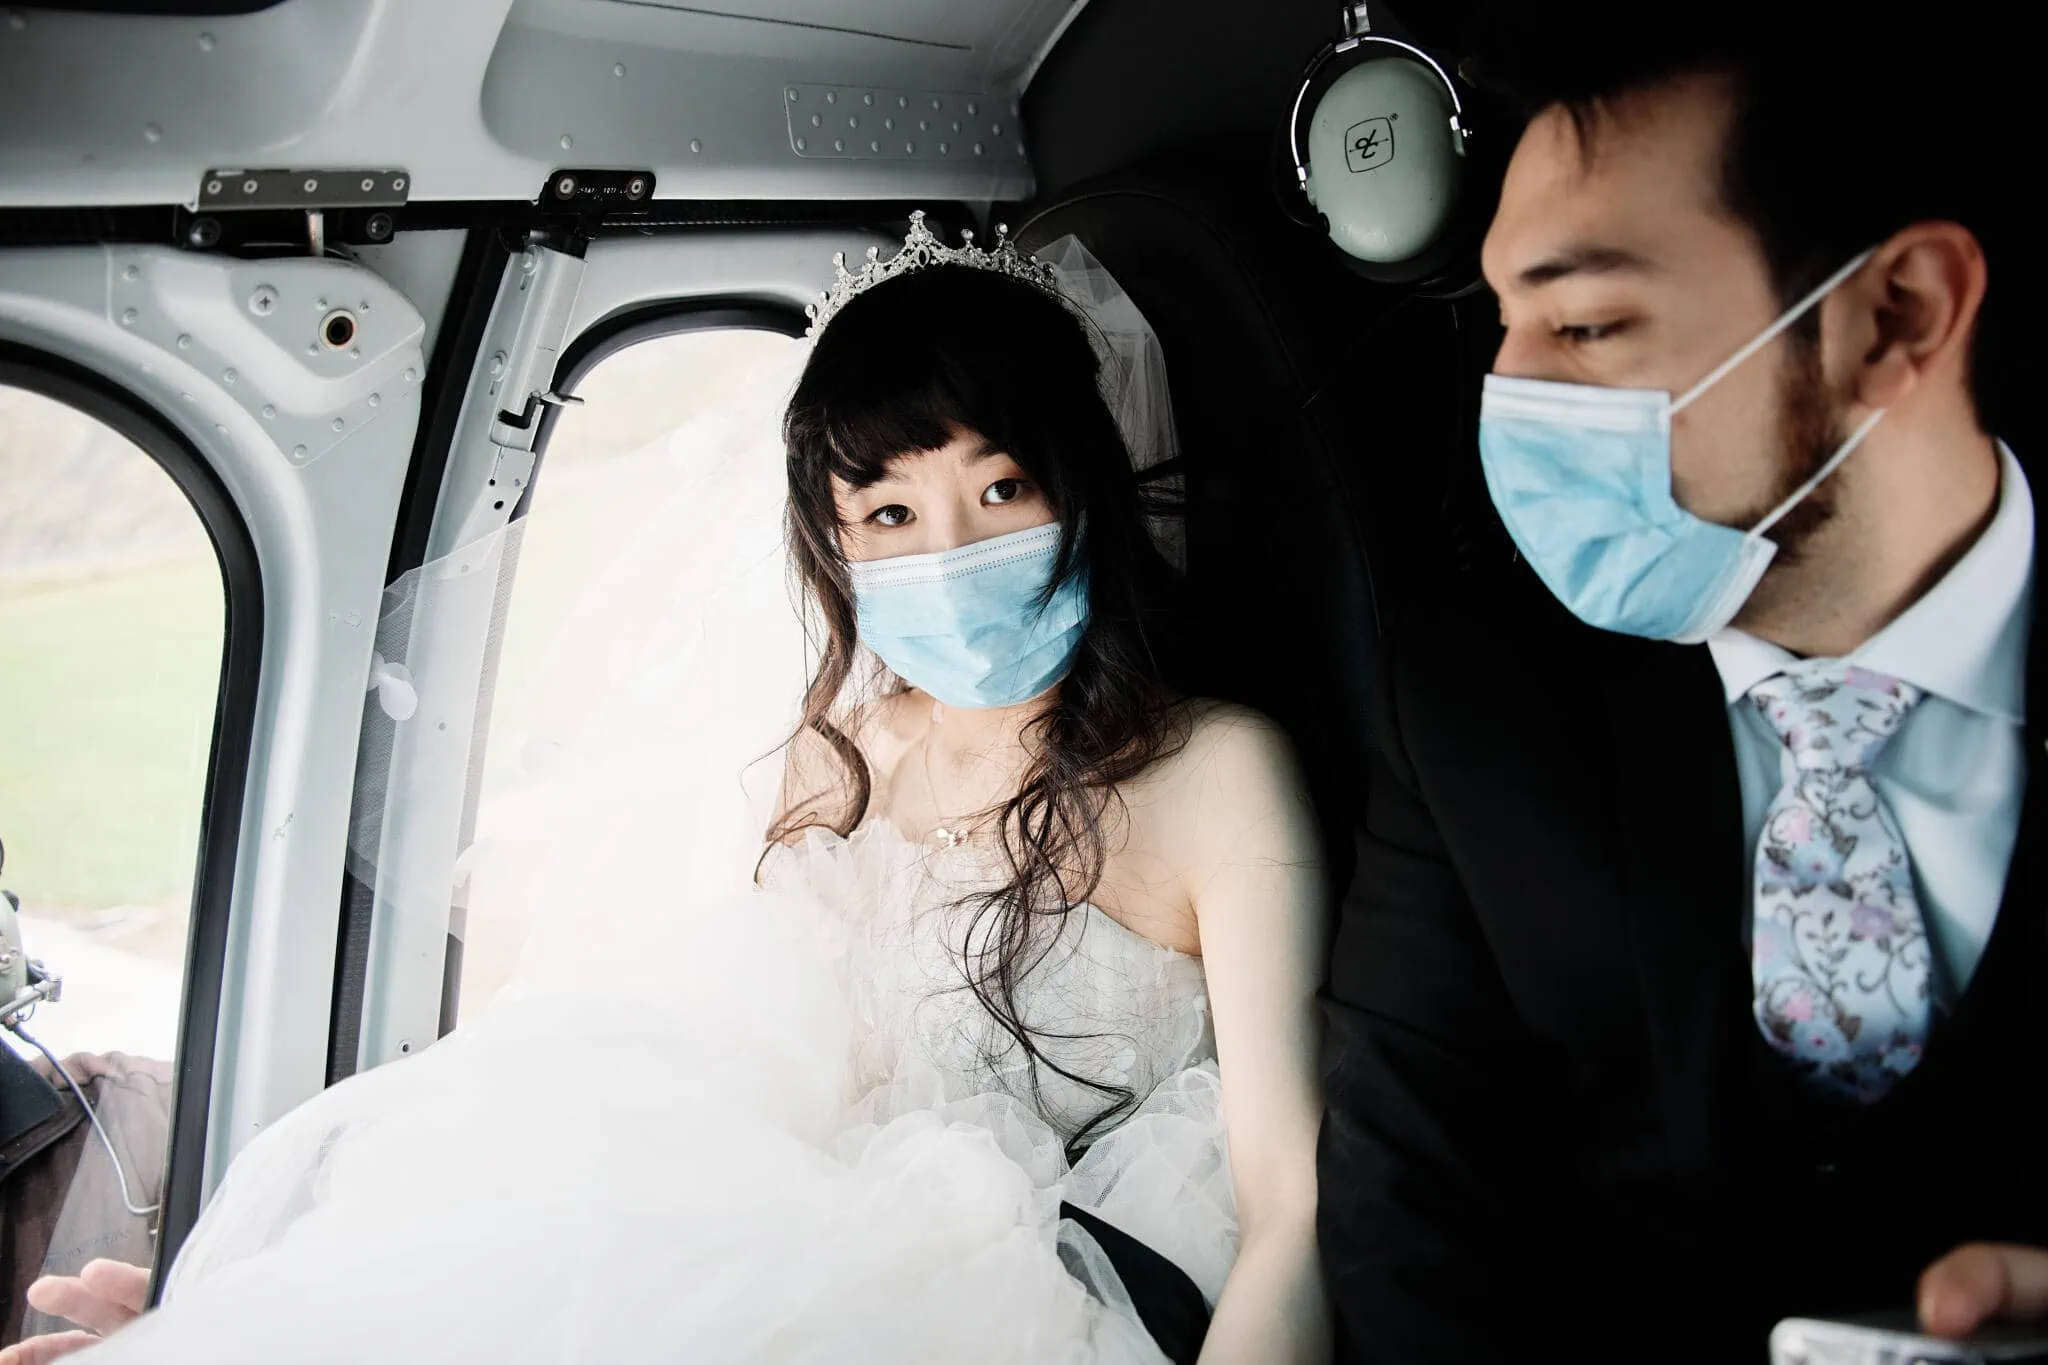 Carlos and Wanzhu have an intimate Cecil Peak Heli elopement wedding, wearing surgical masks in a helicopter.